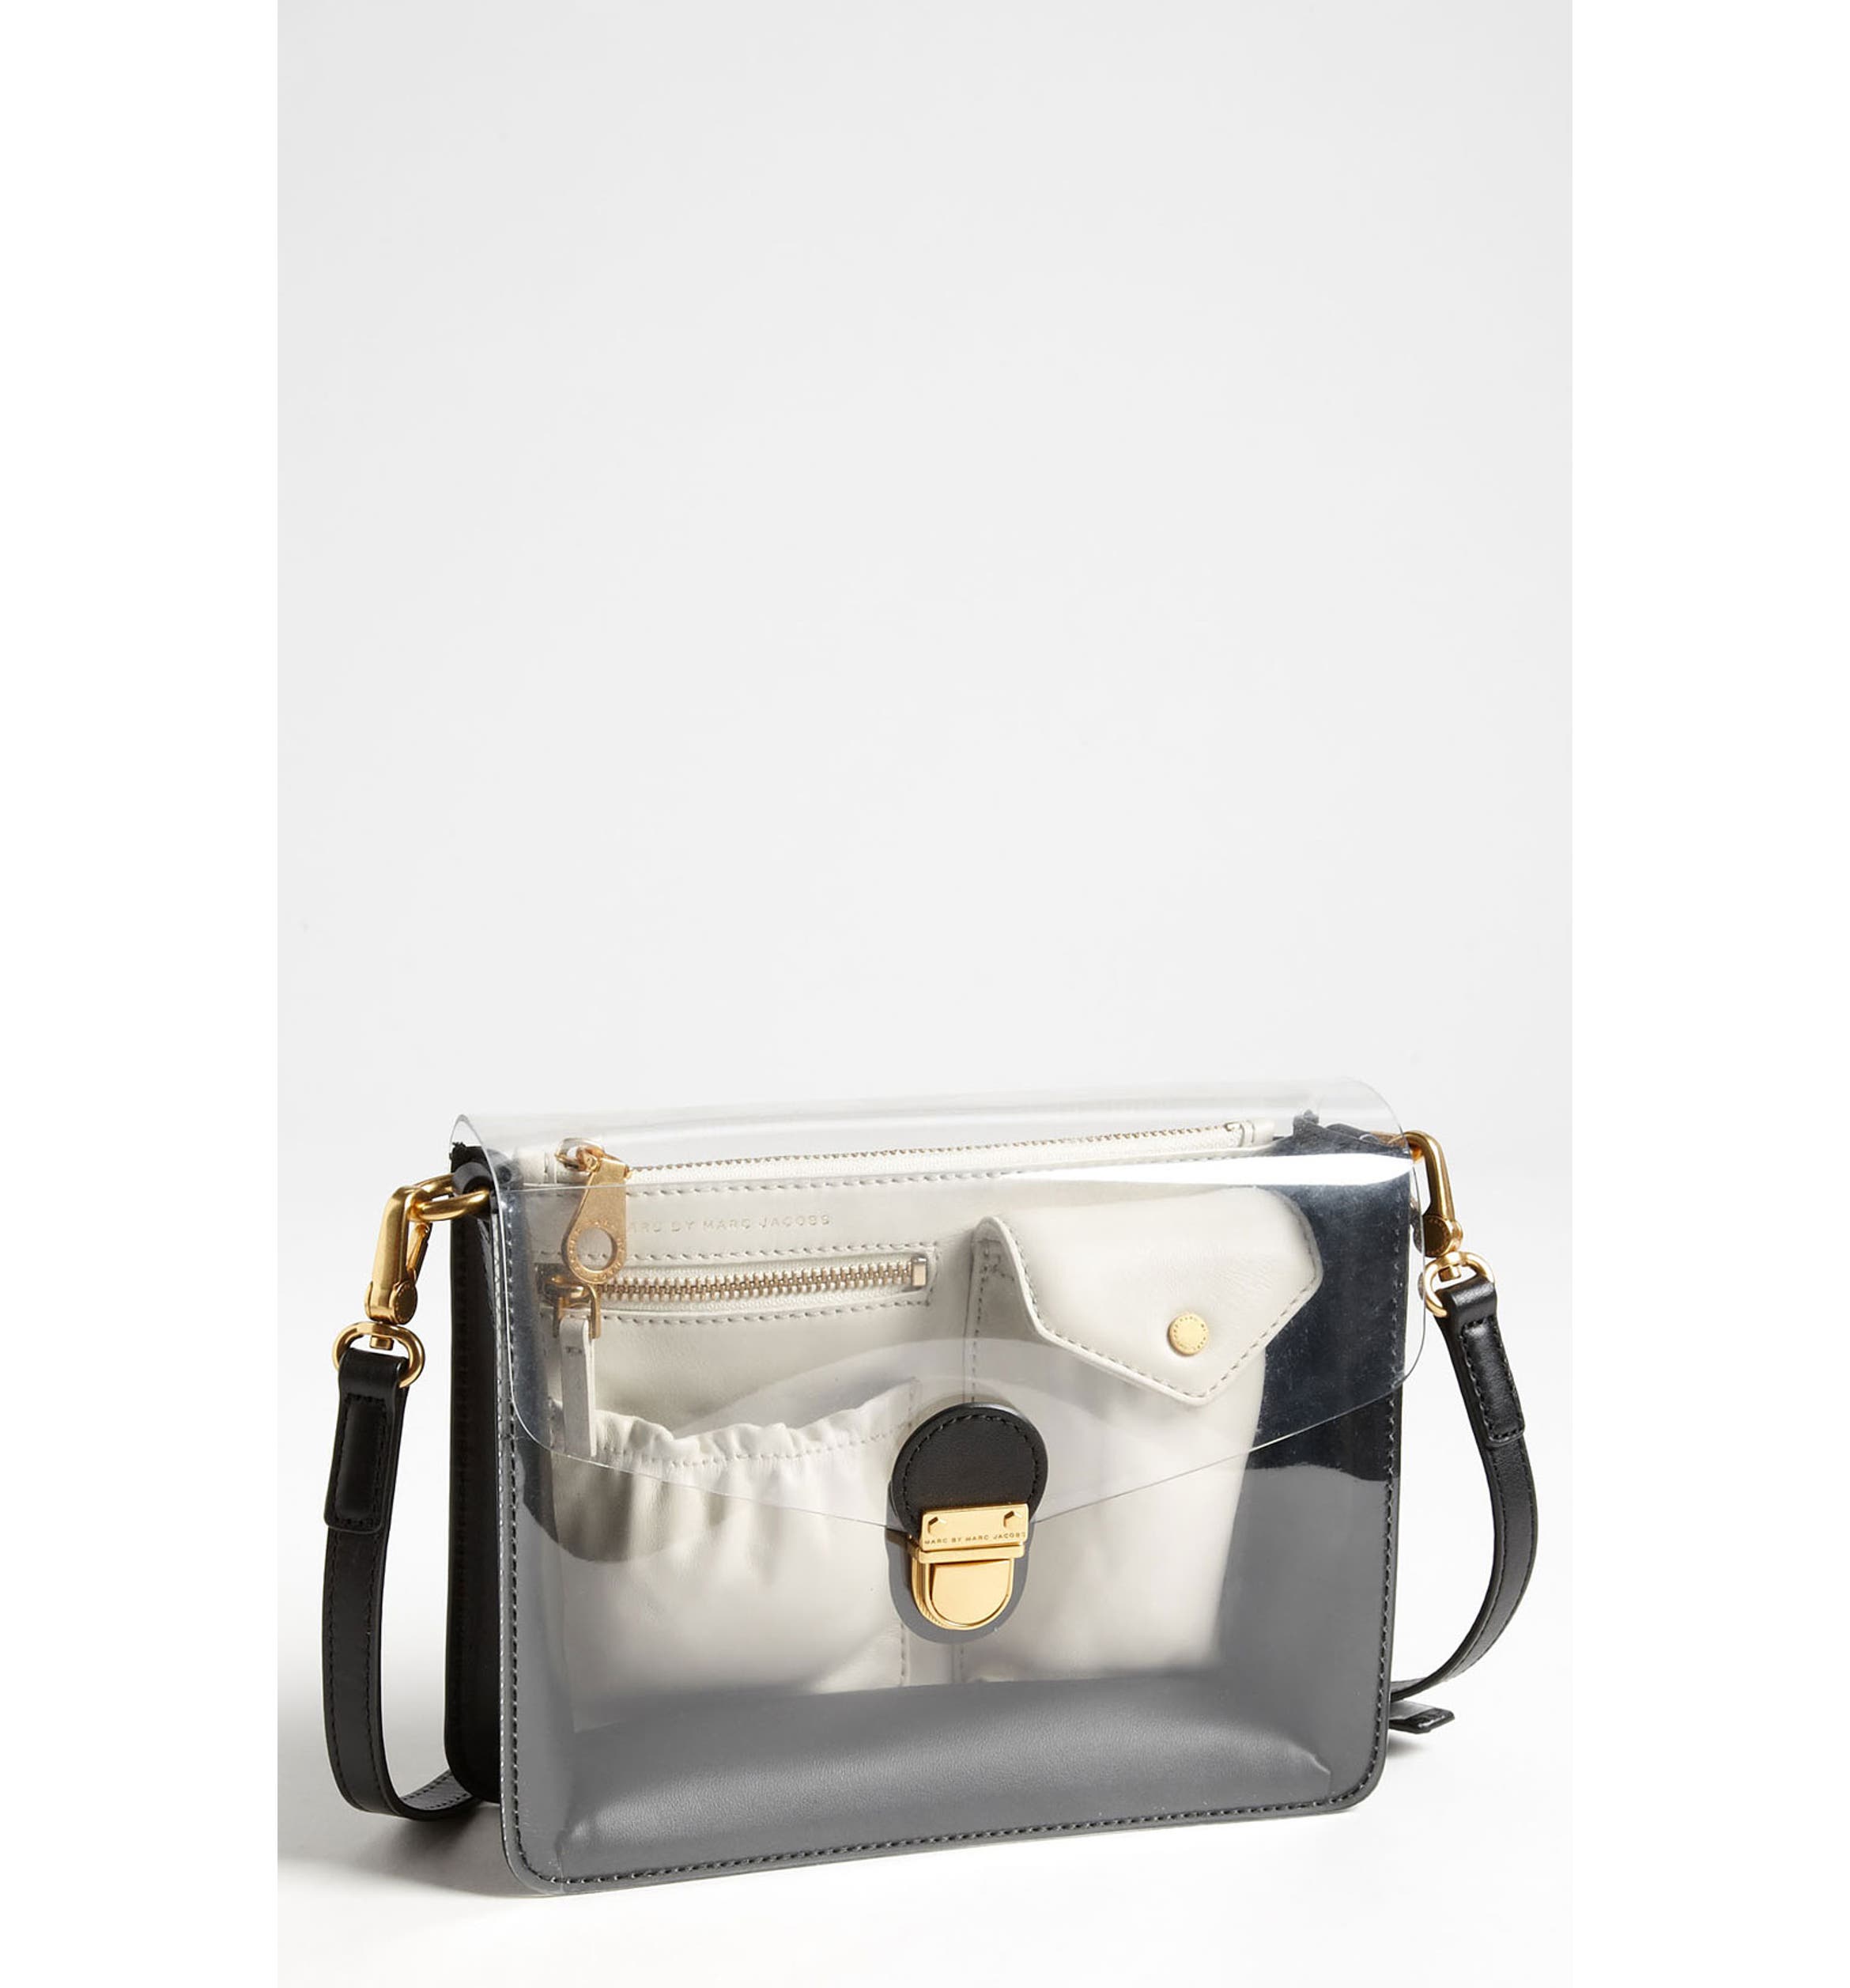 MARC BY MARC JACOBS 'Clearly Colorblocked' Crossbody Bag | Nordstrom